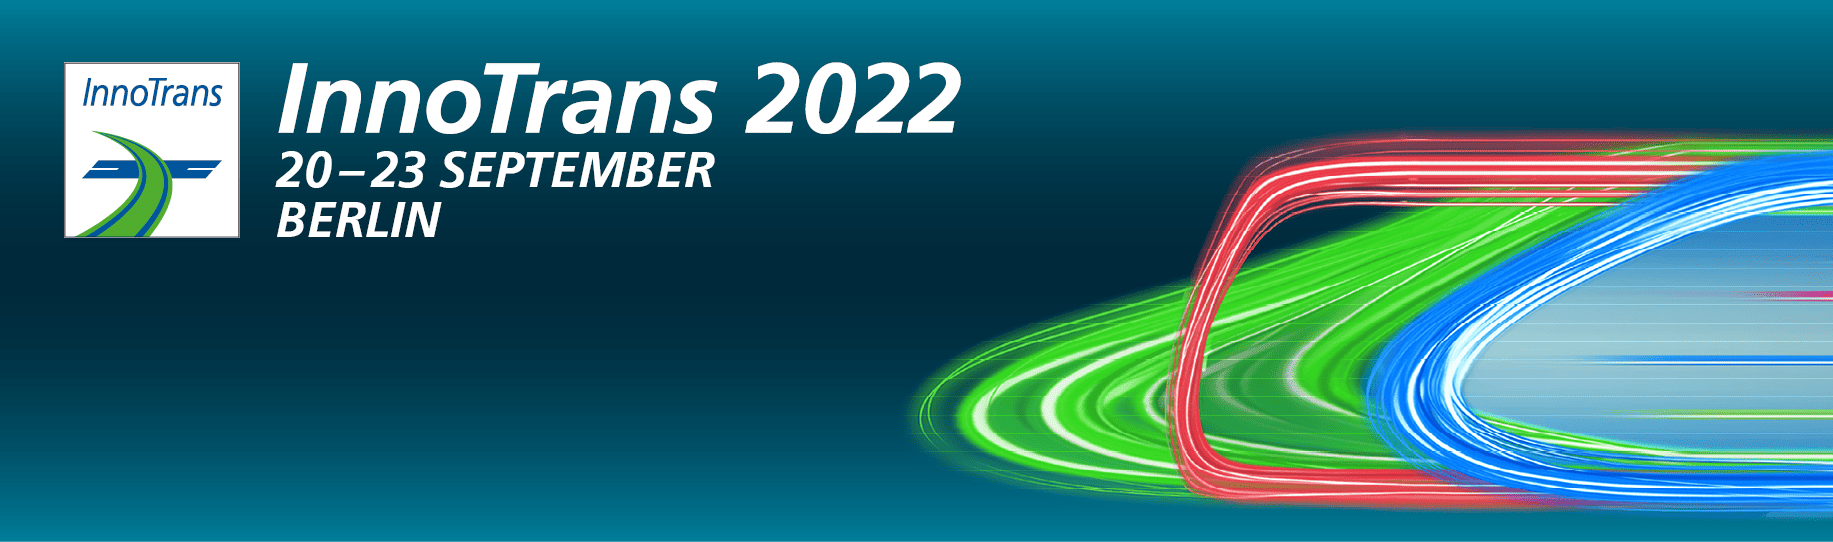 Digital banner for MOBATIME's participation at InnoTrans 2022, highlighting their presence at the event